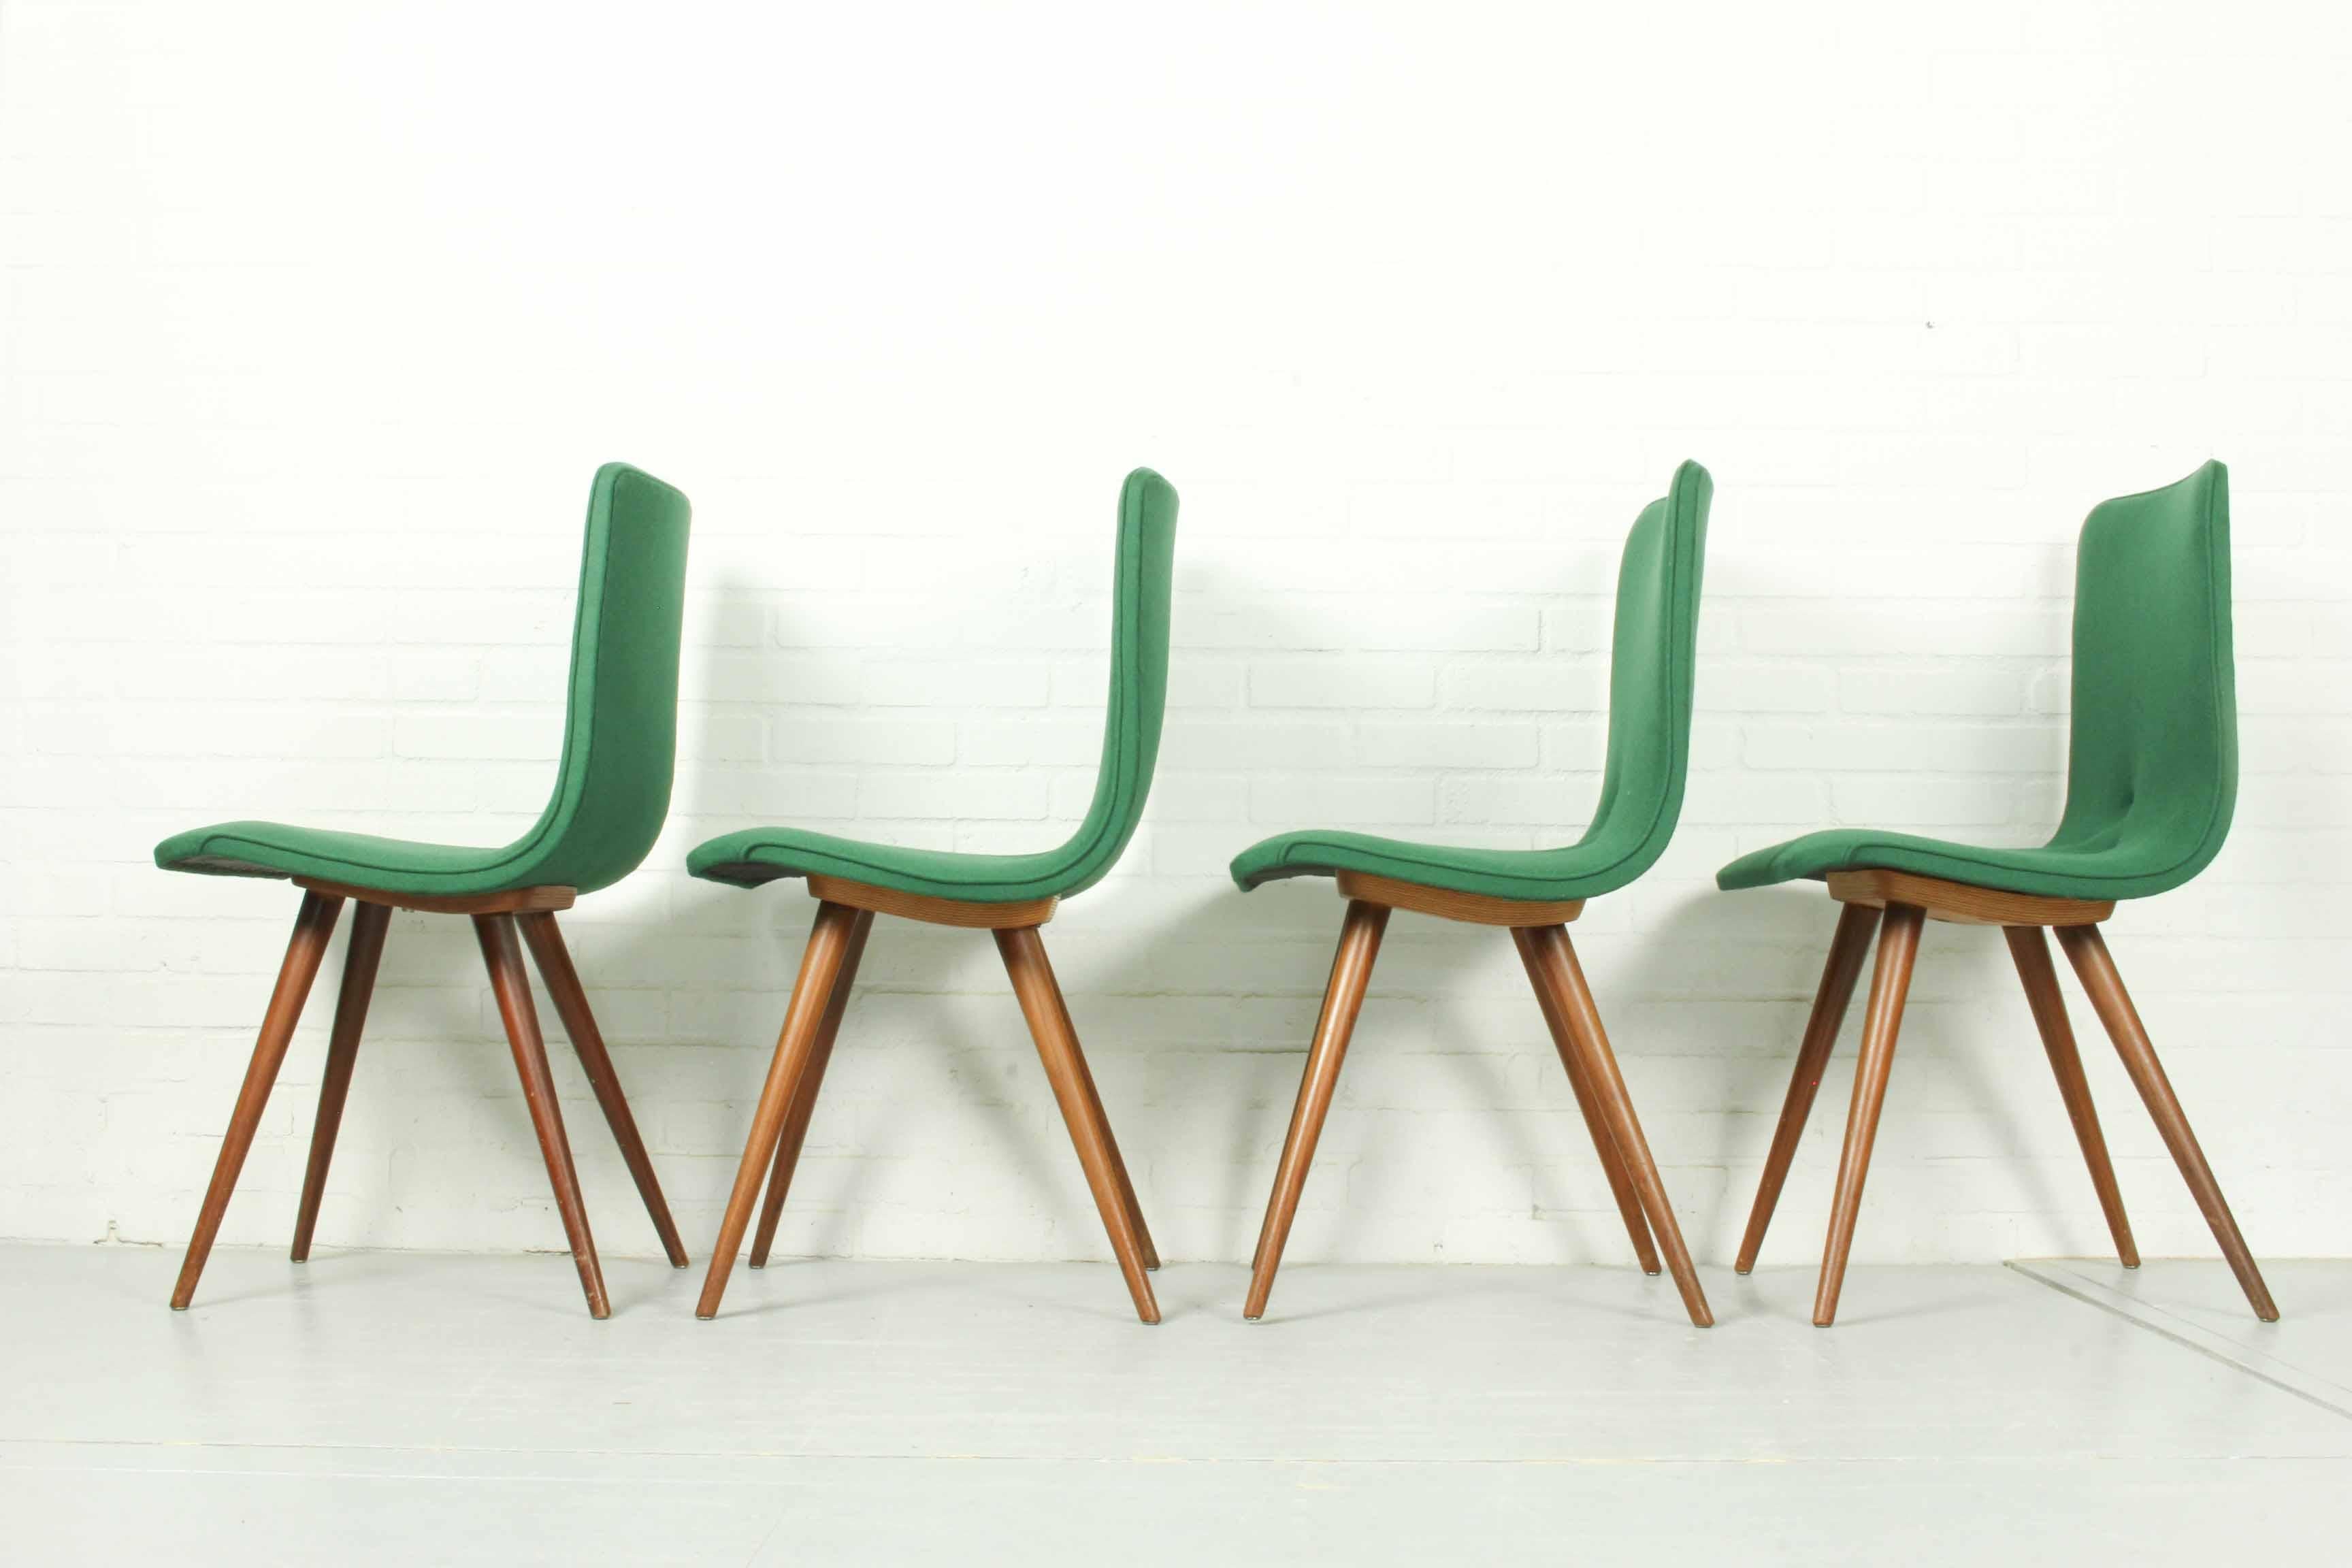 Set of four teak dining chairs by GJ Van Os and made at Furniture Factory G.J. Van Os N.V. in Culemborg (Netherlands) in the 1950s. In very good condition with new green woolfelt upholstery.